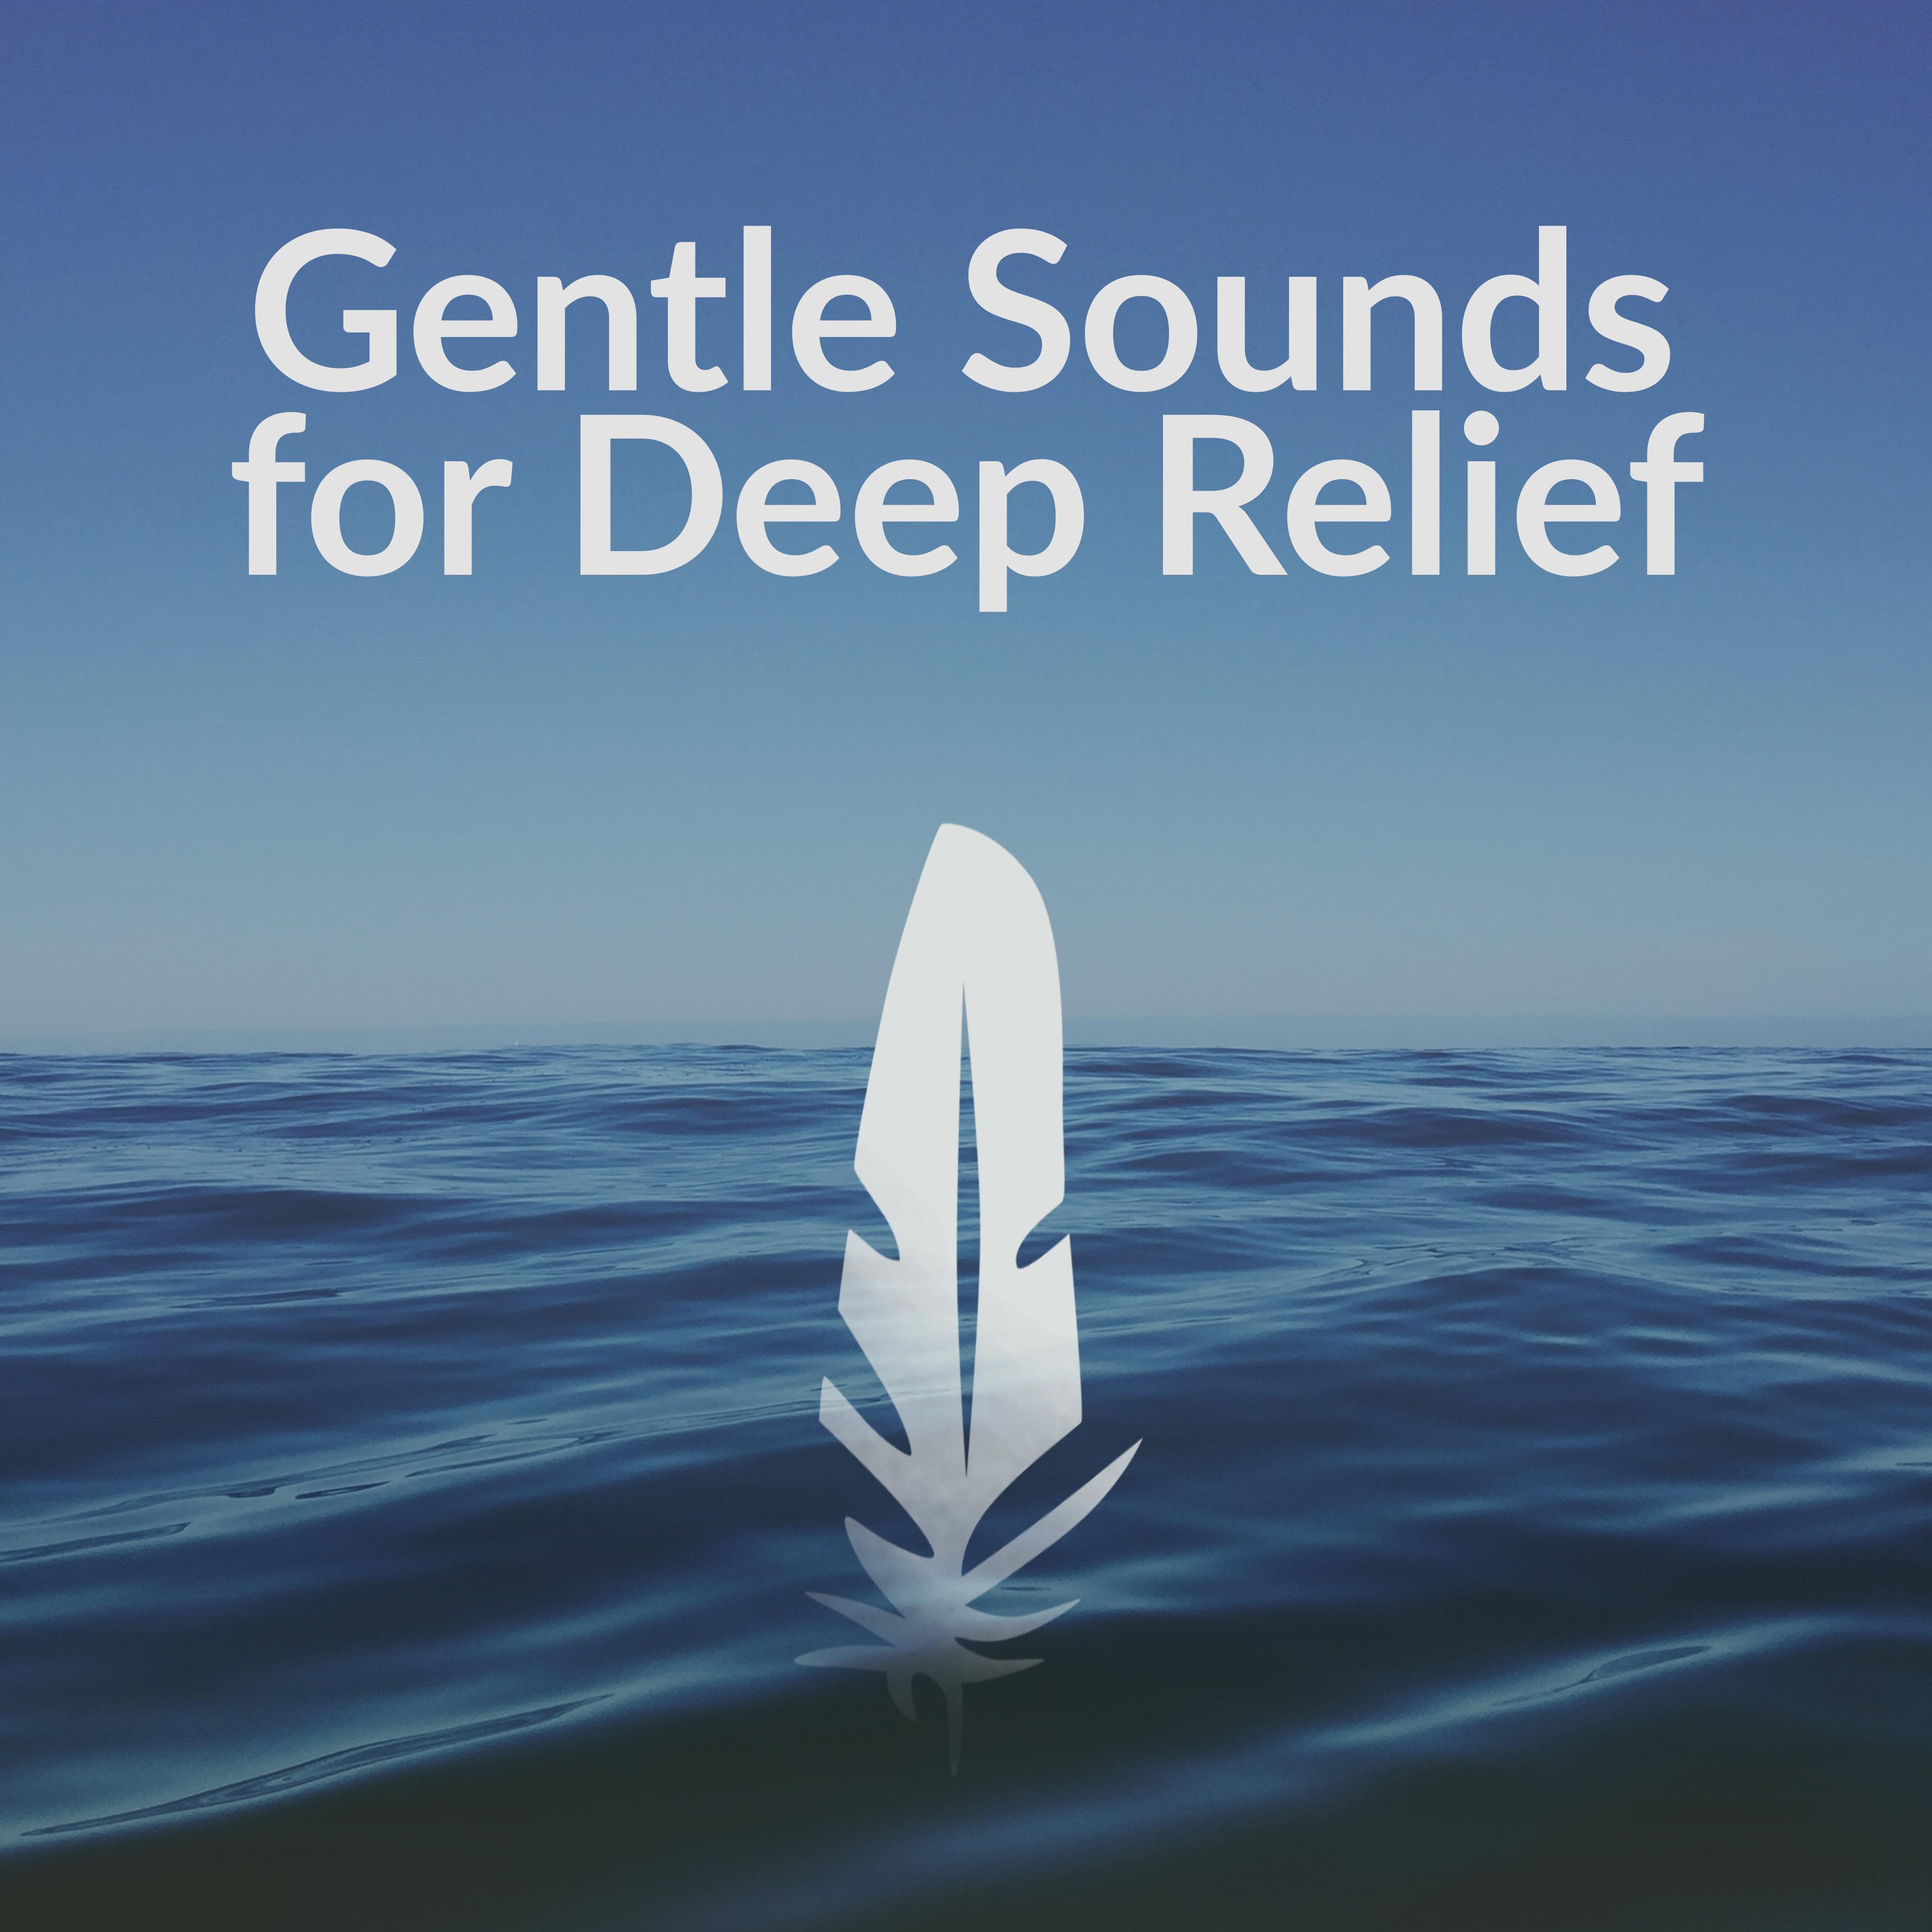 Gentle Sounds for Deep Relief – Deep Sleep, Soft Music, Soothing Rain, Nature Sounds, Relaxing Waves, Healing Guitar, Water Sounds, Stress Relief